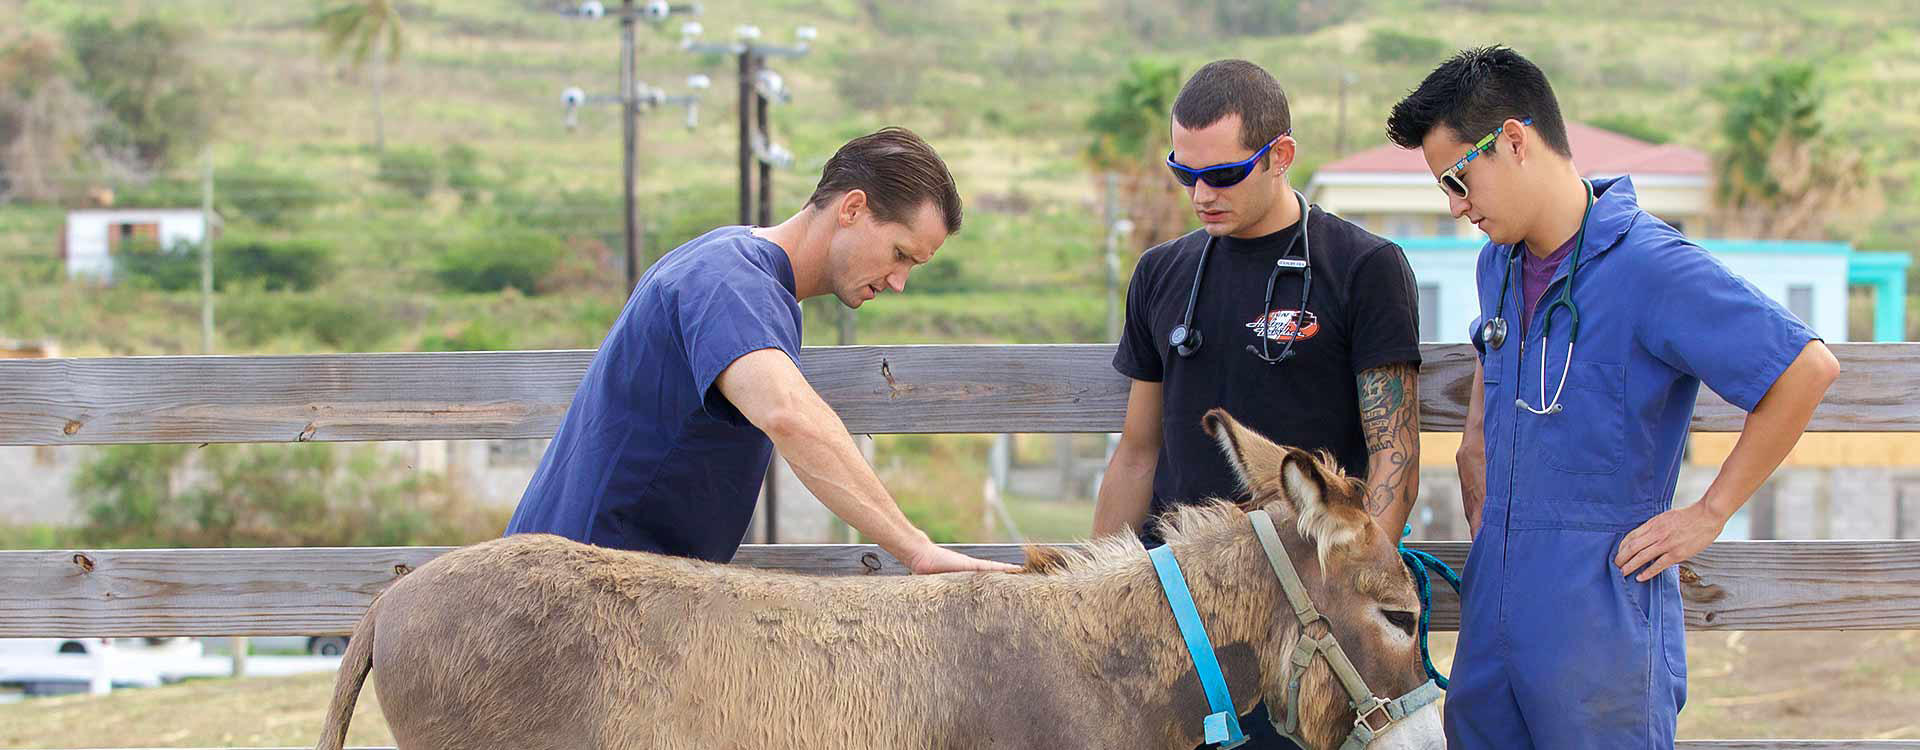 Veterinarians with a donkey in a field